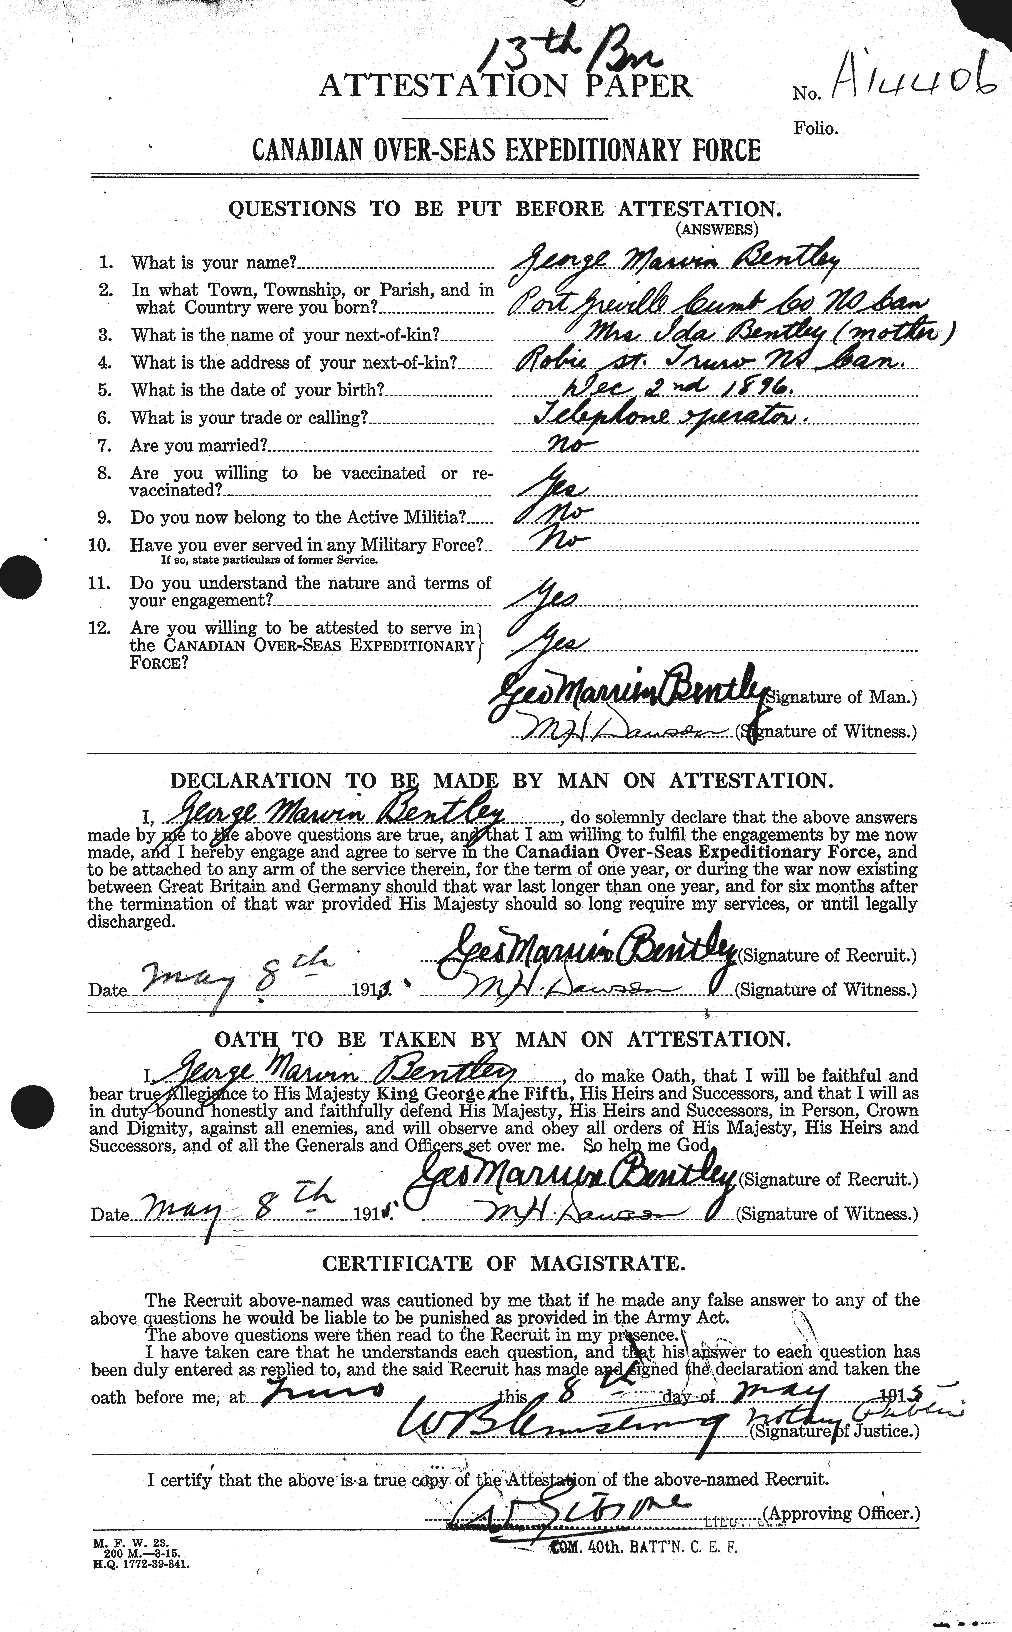 Personnel Records of the First World War - CEF 237916a